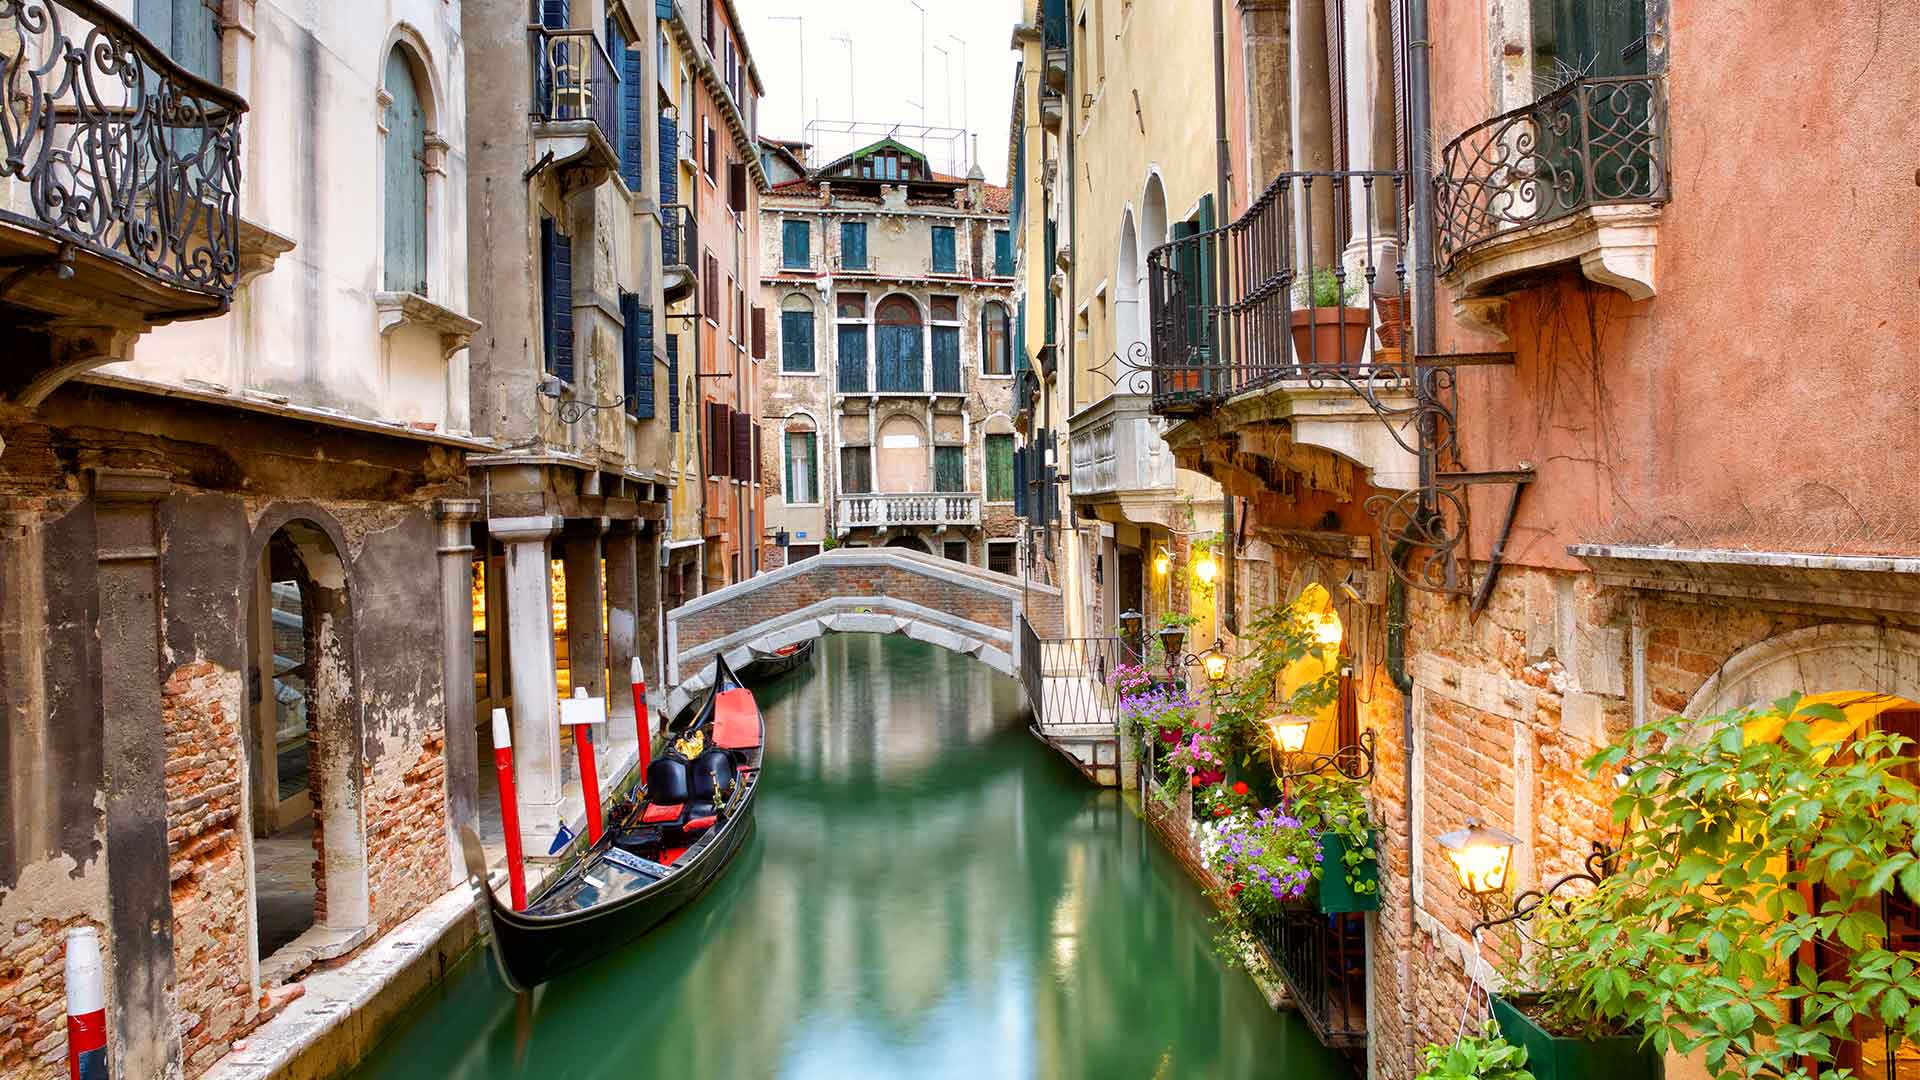 A bridge in Venice joining two buildings